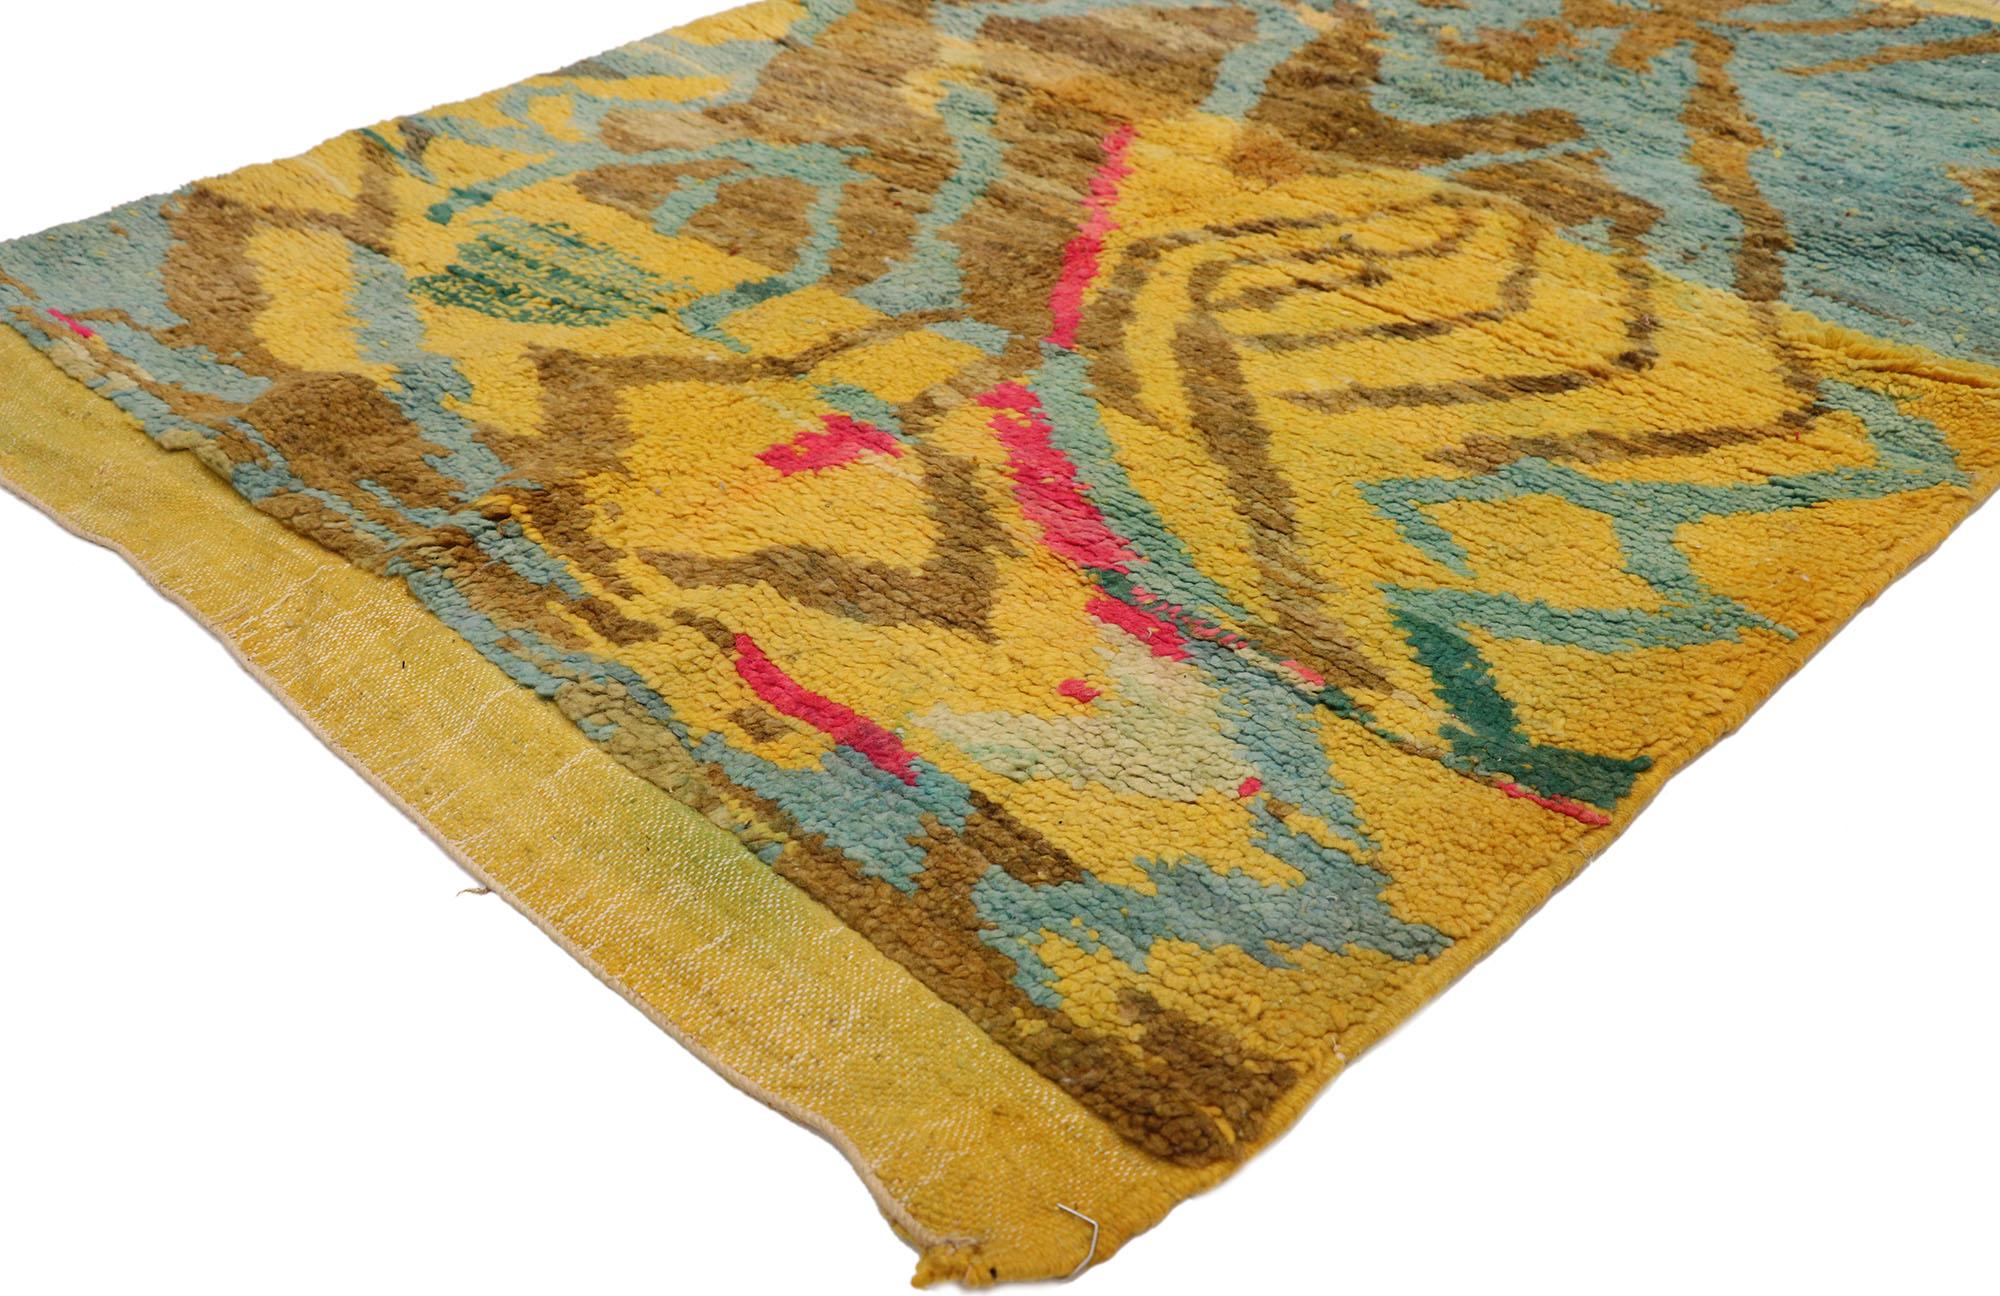 21065 new contemporary Berber Moroccan rug with Abstract Expressionist style. Displaying asymmetrical spontaneity and bursting with poly-chromatic brilliancy, this hand knotted wool contemporary Berber Moroccan rug beautifully embodies Contemporary